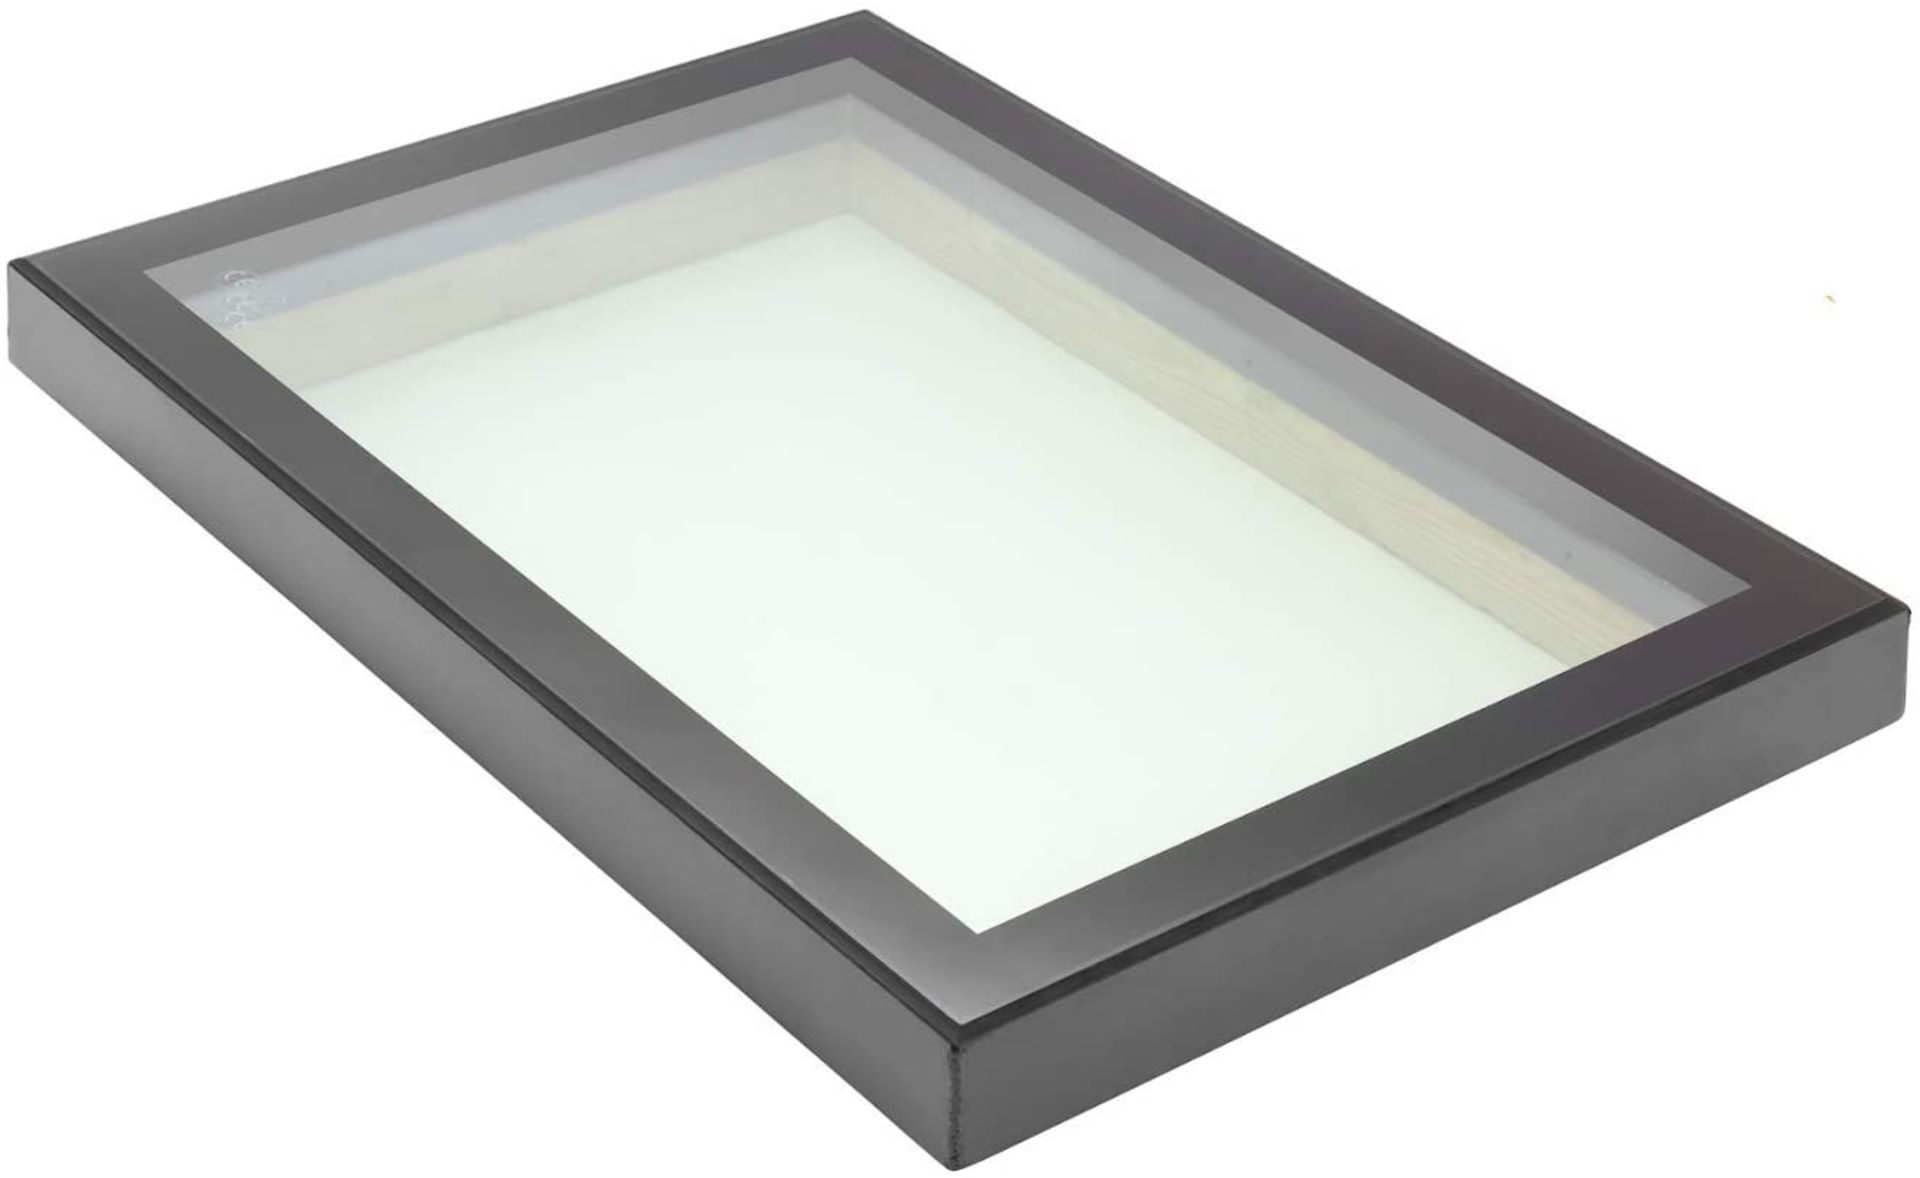 Panoroof (EOS) Fixed Aluminium Triple-Glazed Laminated Skylight with Self-Cleaning Glass - 1500x1500